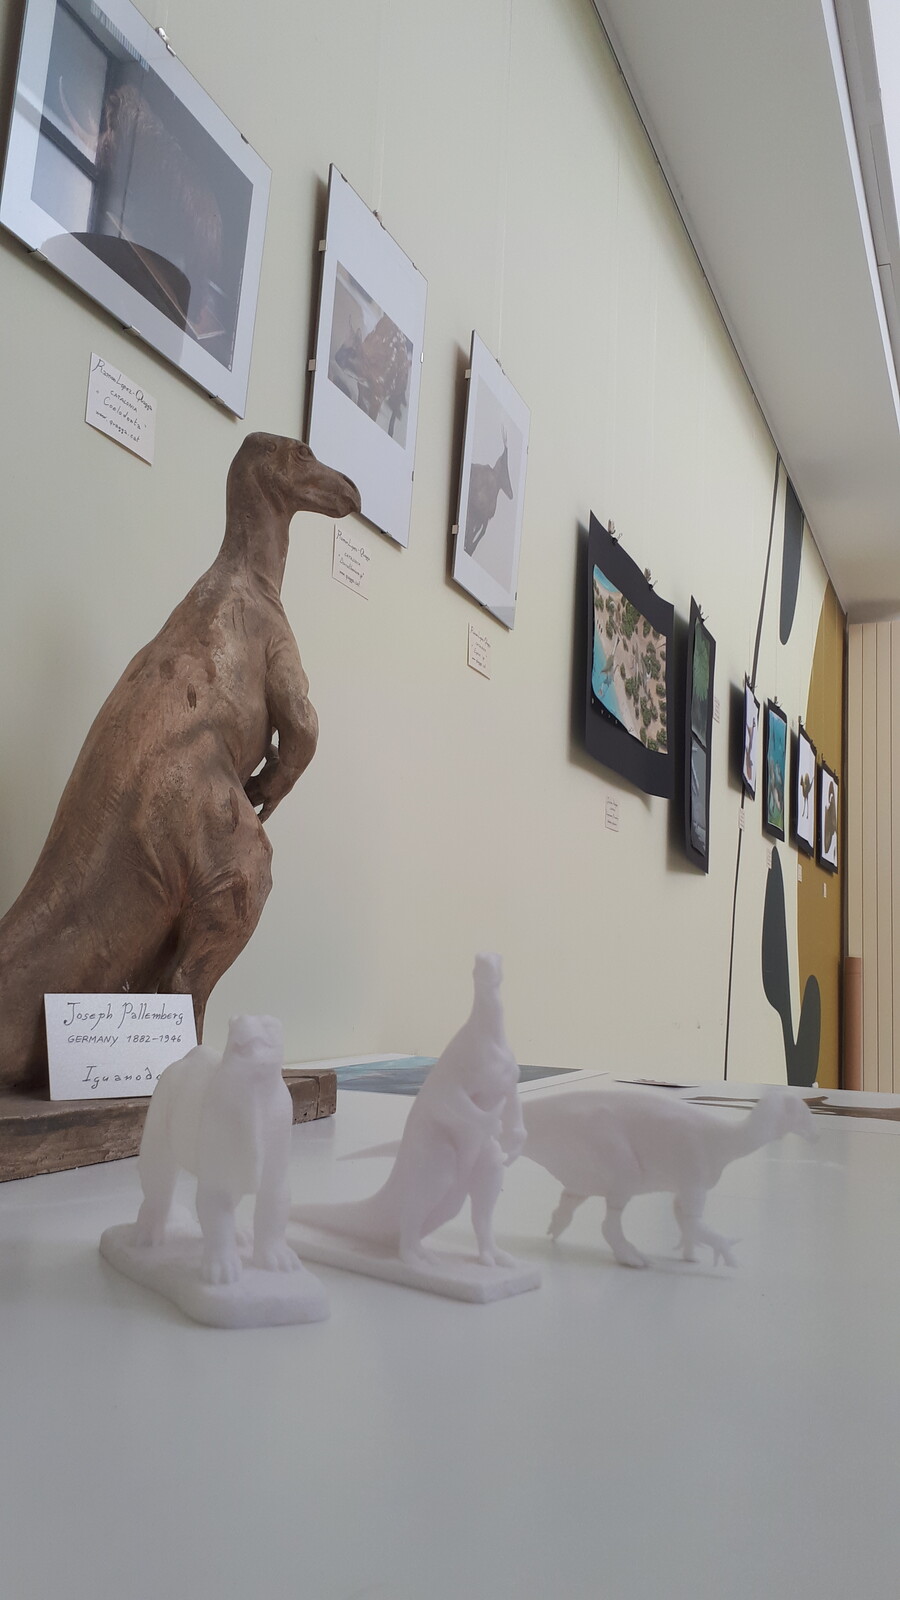 3d printed version. Me and F. Bertozzo have organized the first paleoart event &amp; exhibition at the EAVP meetings. Here a series of historical models, including the original maquette by Joseph Pallenberg (~1910)